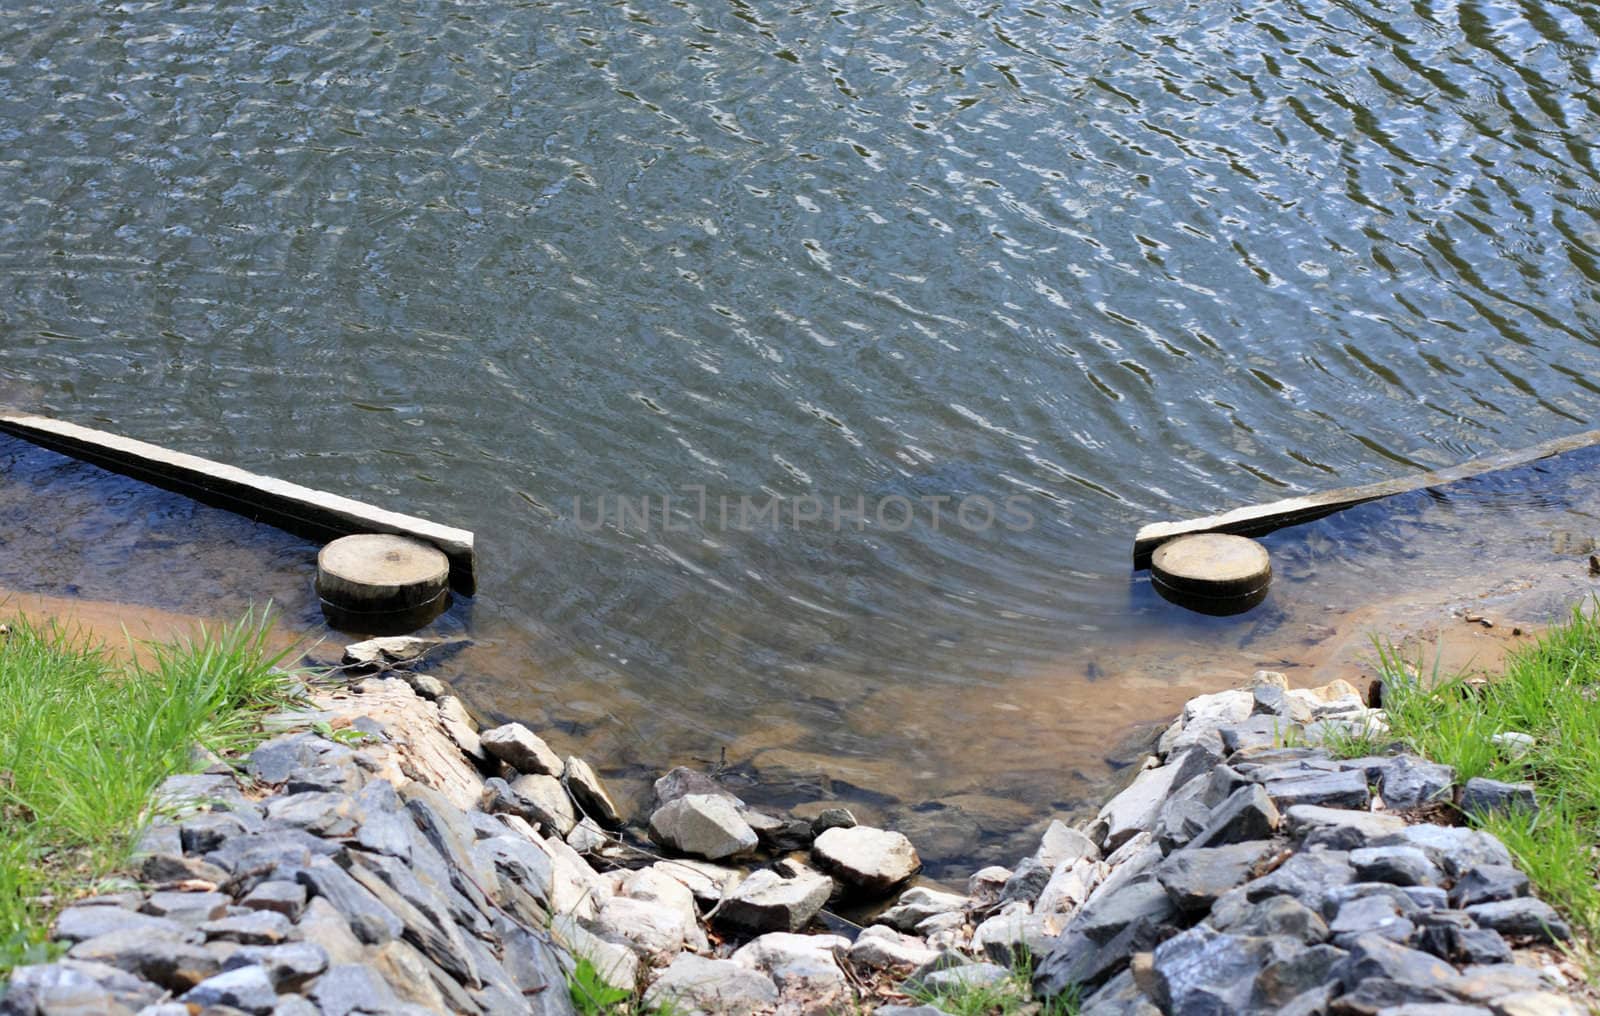 Drain, plums, channel, pond, stones, water, green, grass, log, day, spring